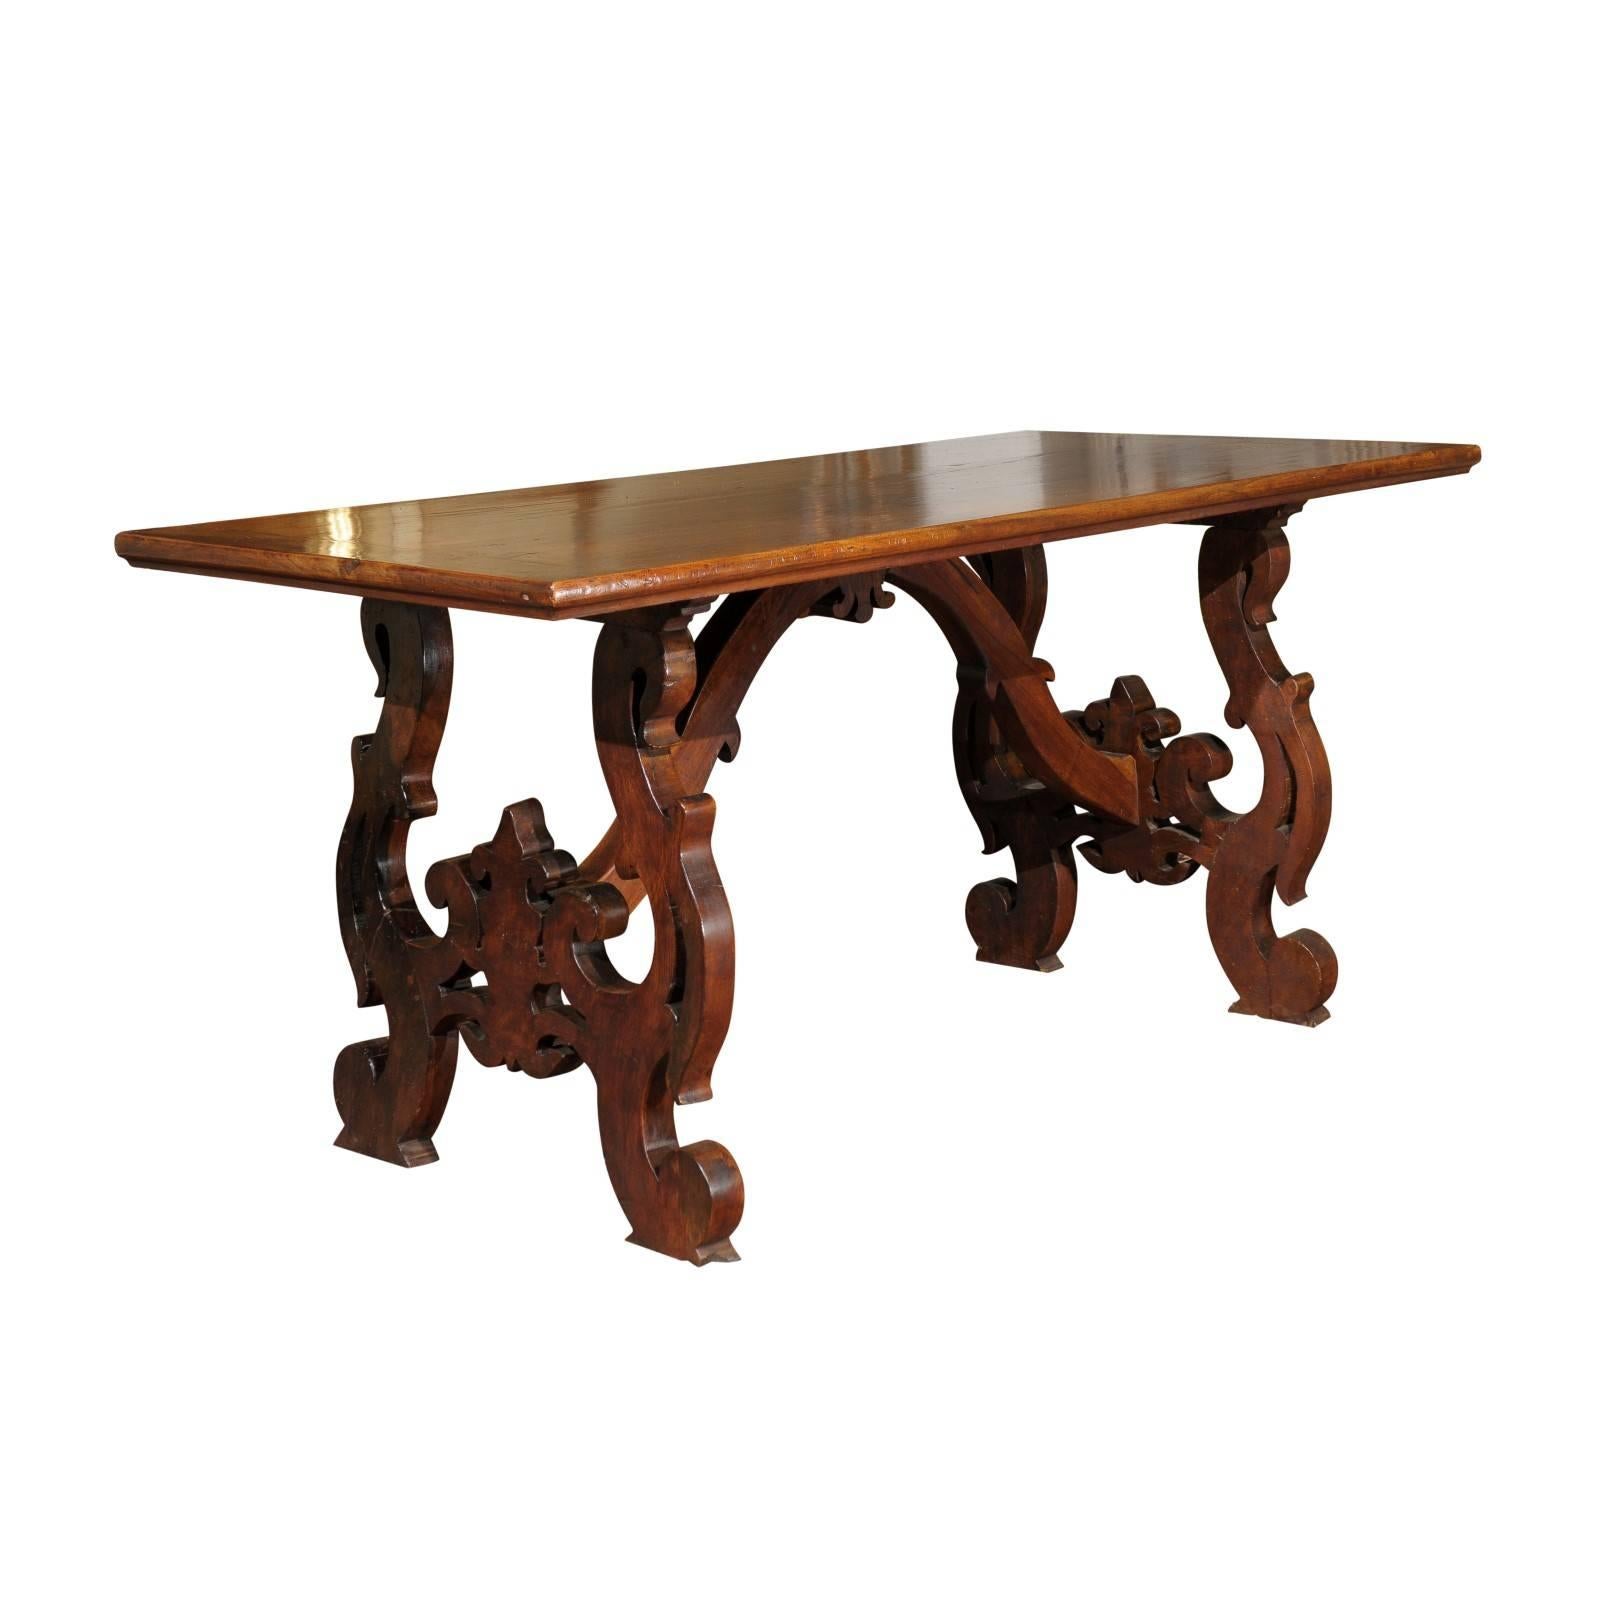 Italian 1820s Baroque Style Walnut Dining Table with Lyre-Shaped Legs